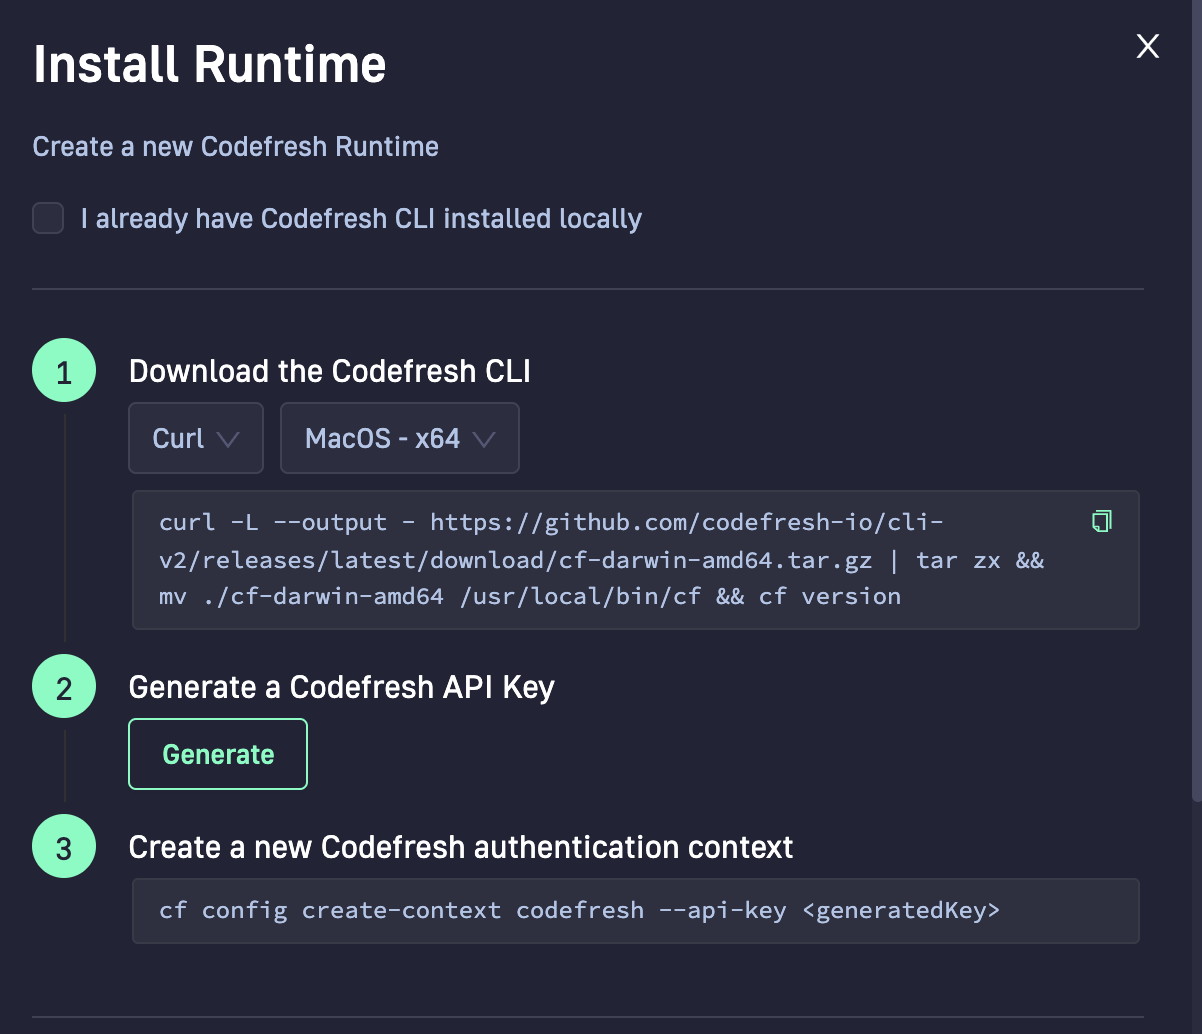 Download CLI to install runtime